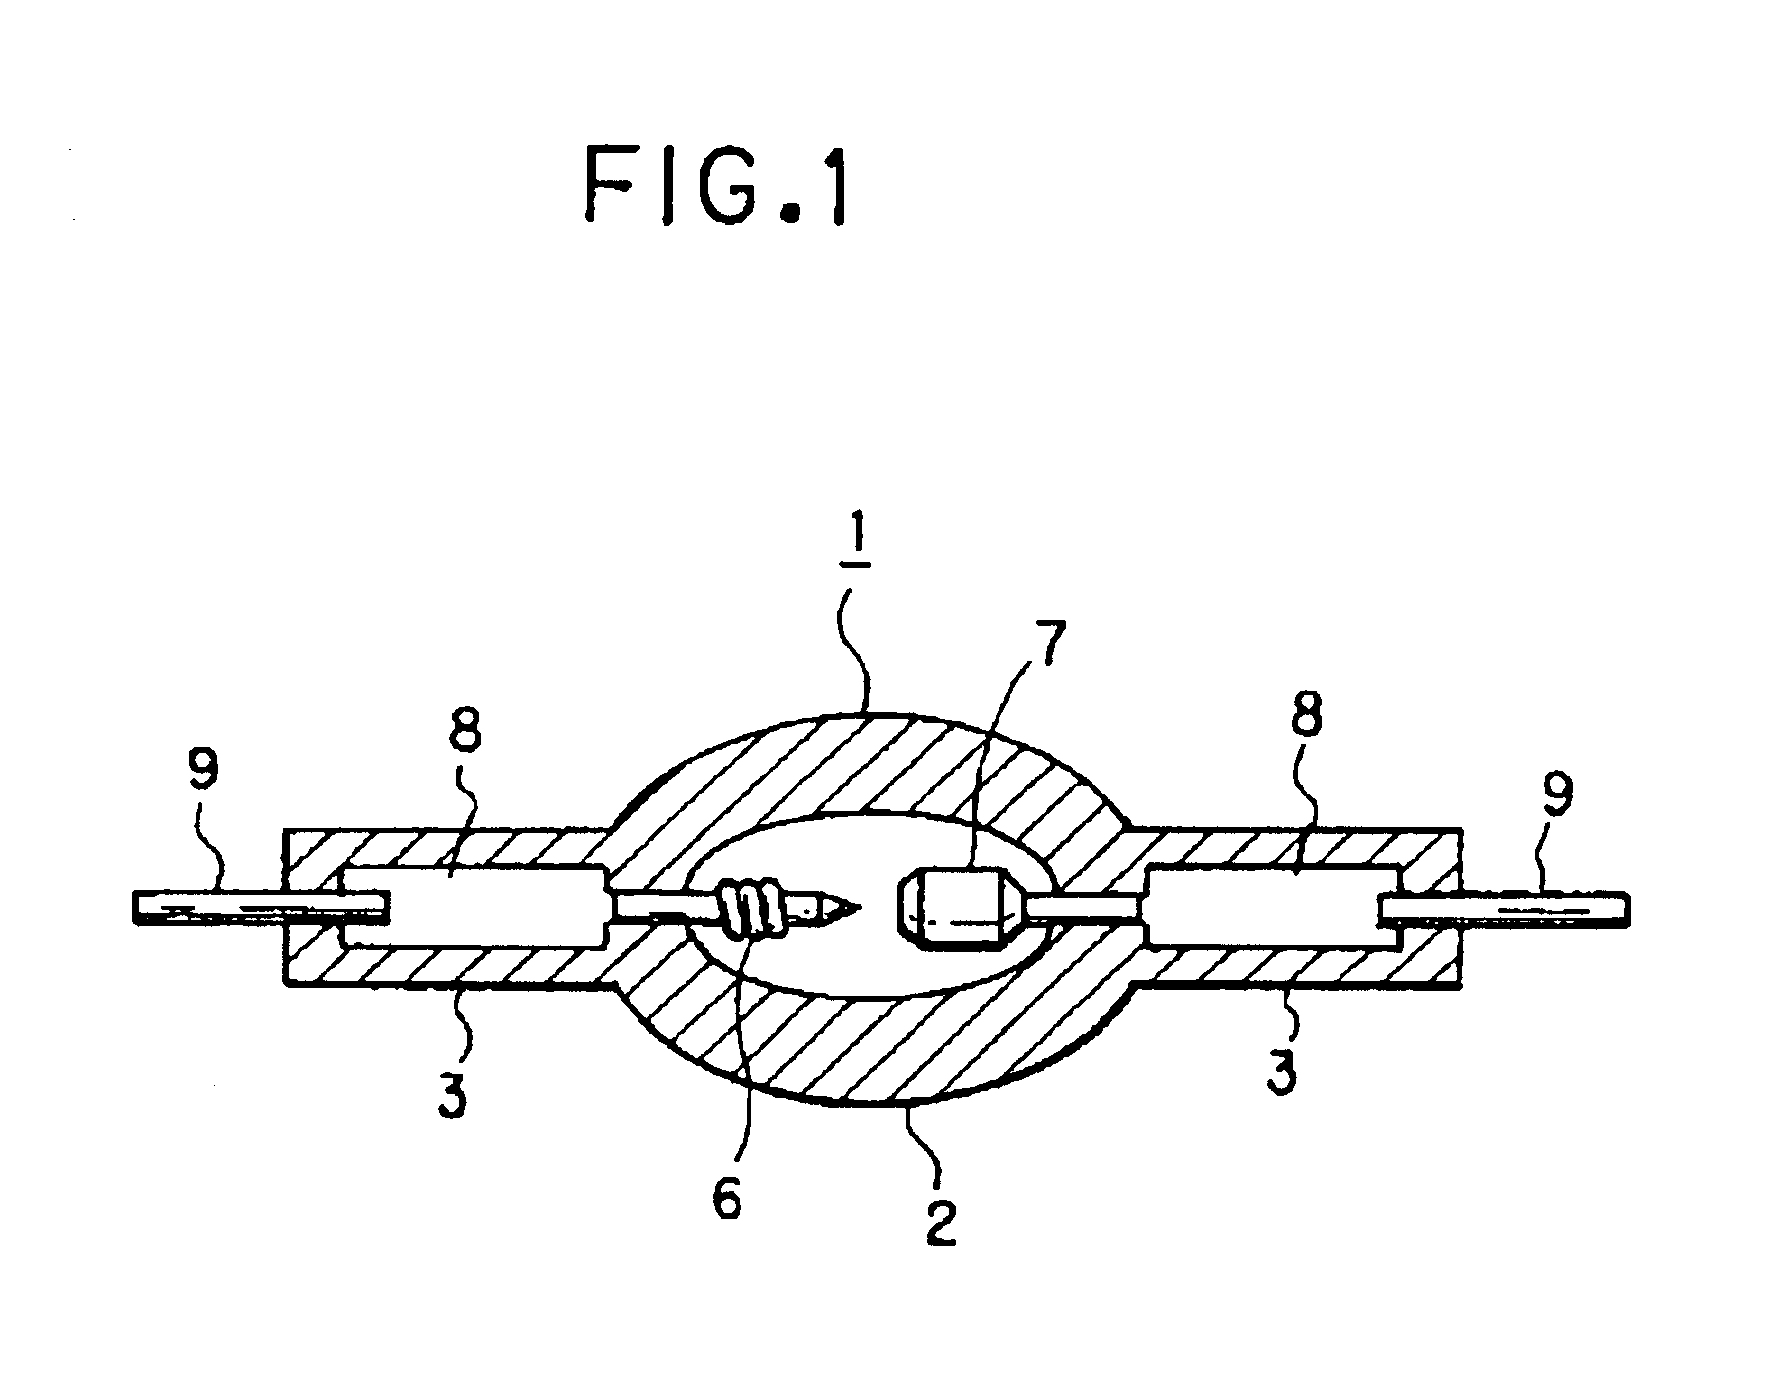 Ultrahigh pressure discharge lamp of the short arc type with improved metal foil to electrode connection arrangement